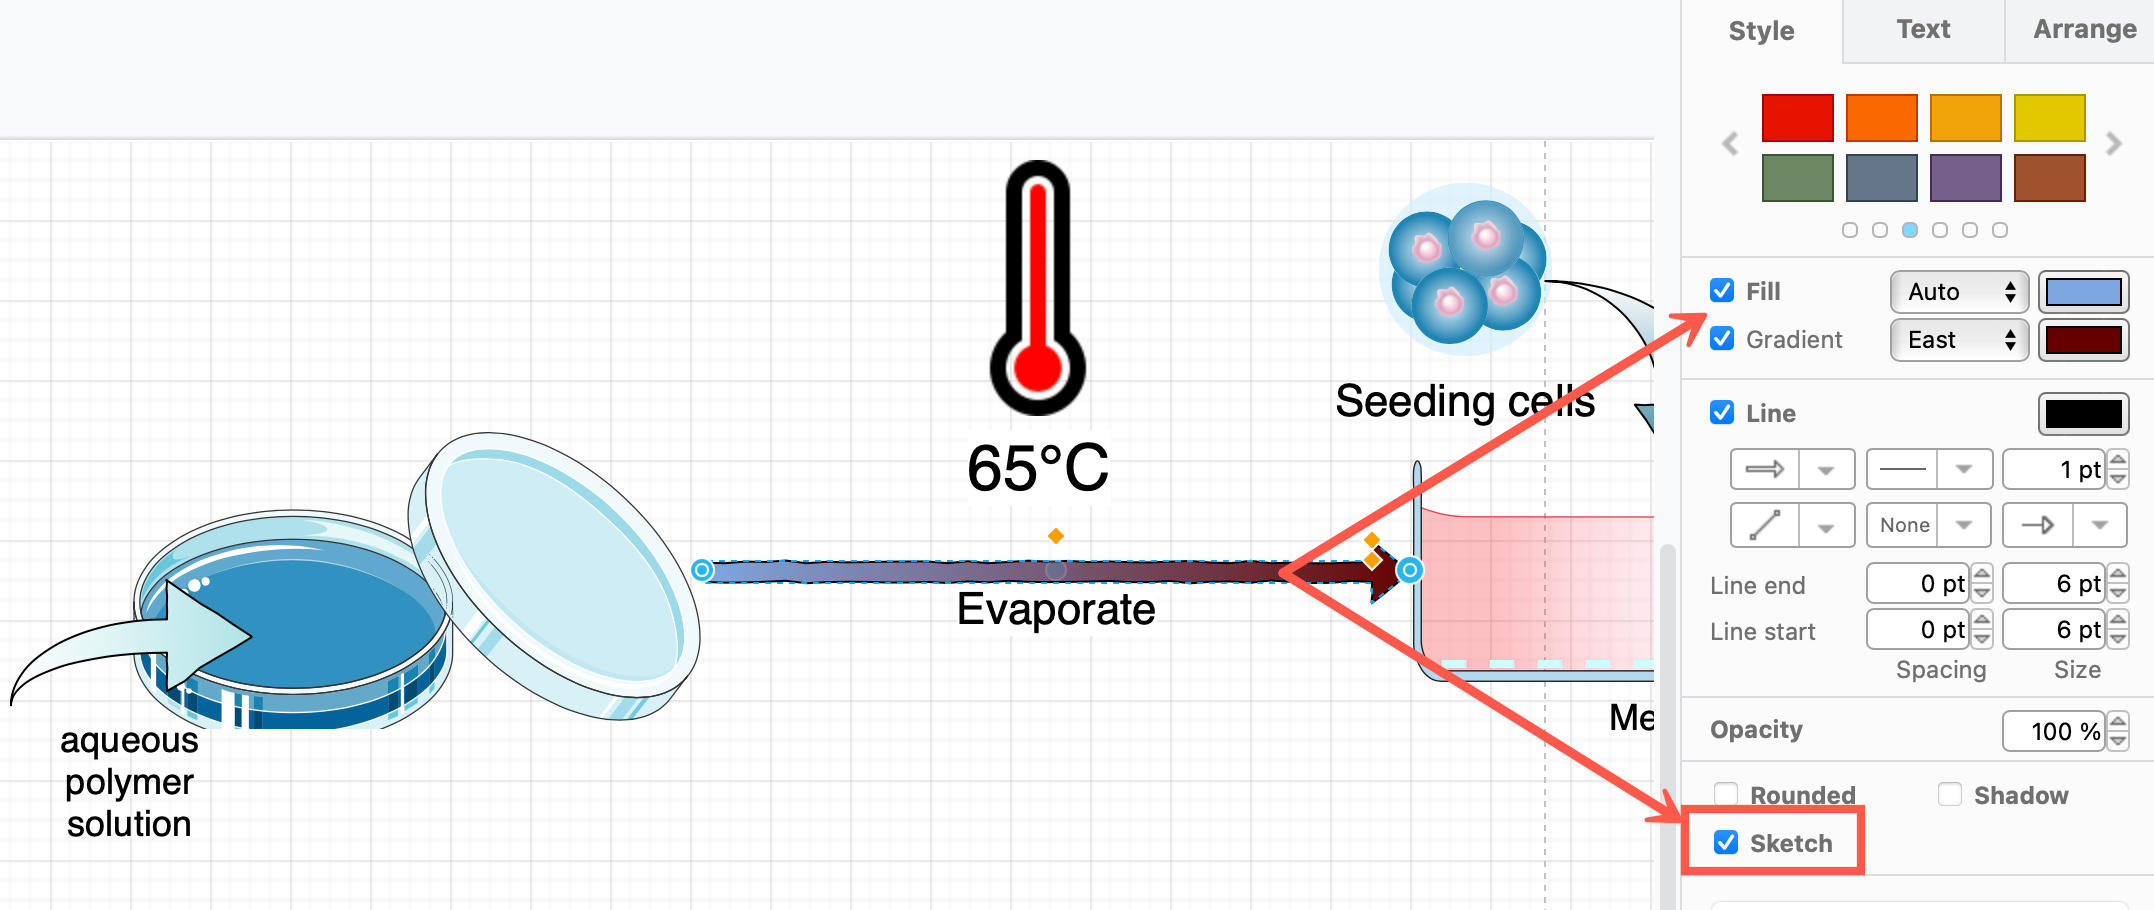 Style your diagram to match the Bioicons you have used and to add clear visual explanations